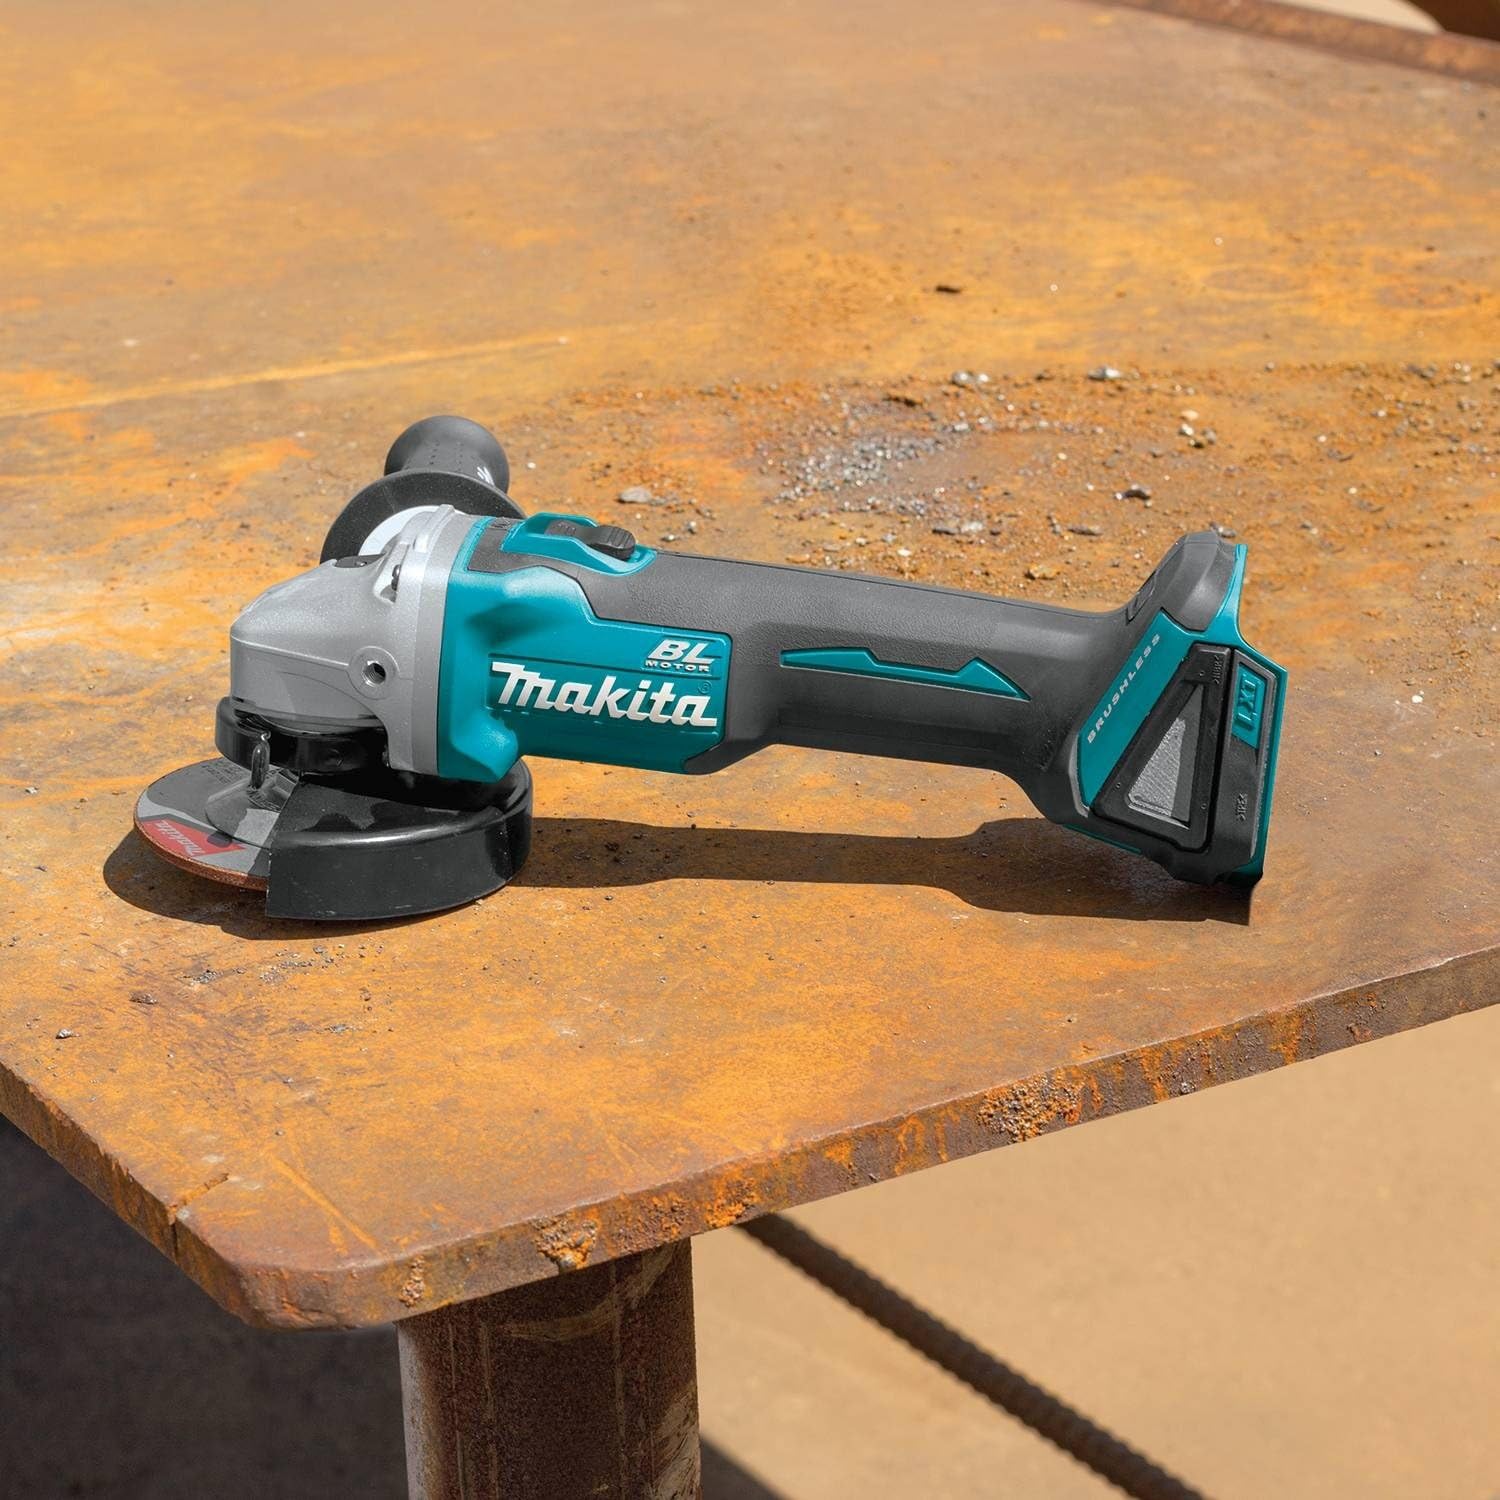 Makita BL1840BDC2 18V LXT Lithium-Ion Battery and Rapid Optimum Charger Starter Pack (4.0Ah) with XAG04Z 18V LXT Lithium-Ion Brushless Cordless 4-1/2” / 5 Cut-Off/Angle Grinder